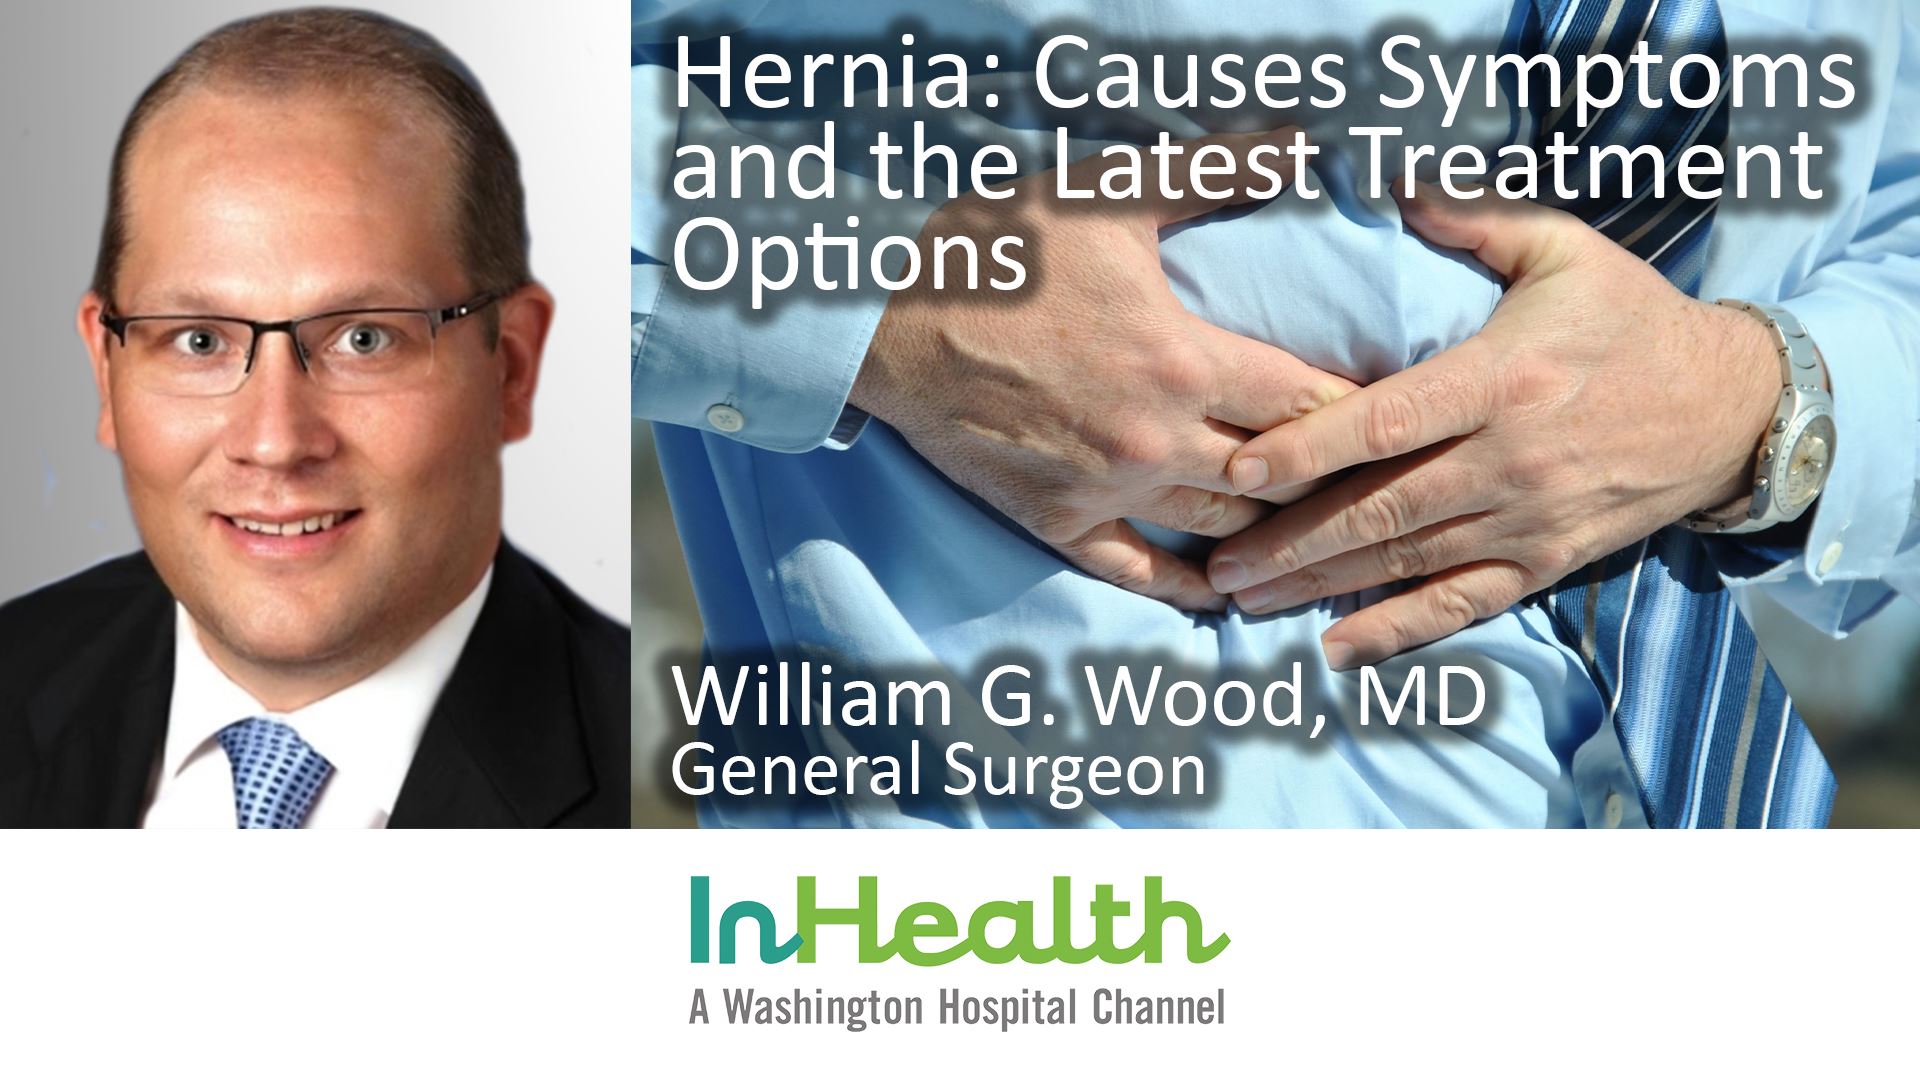 Hernias: Causes Symptoms and the Latest Treatment Options